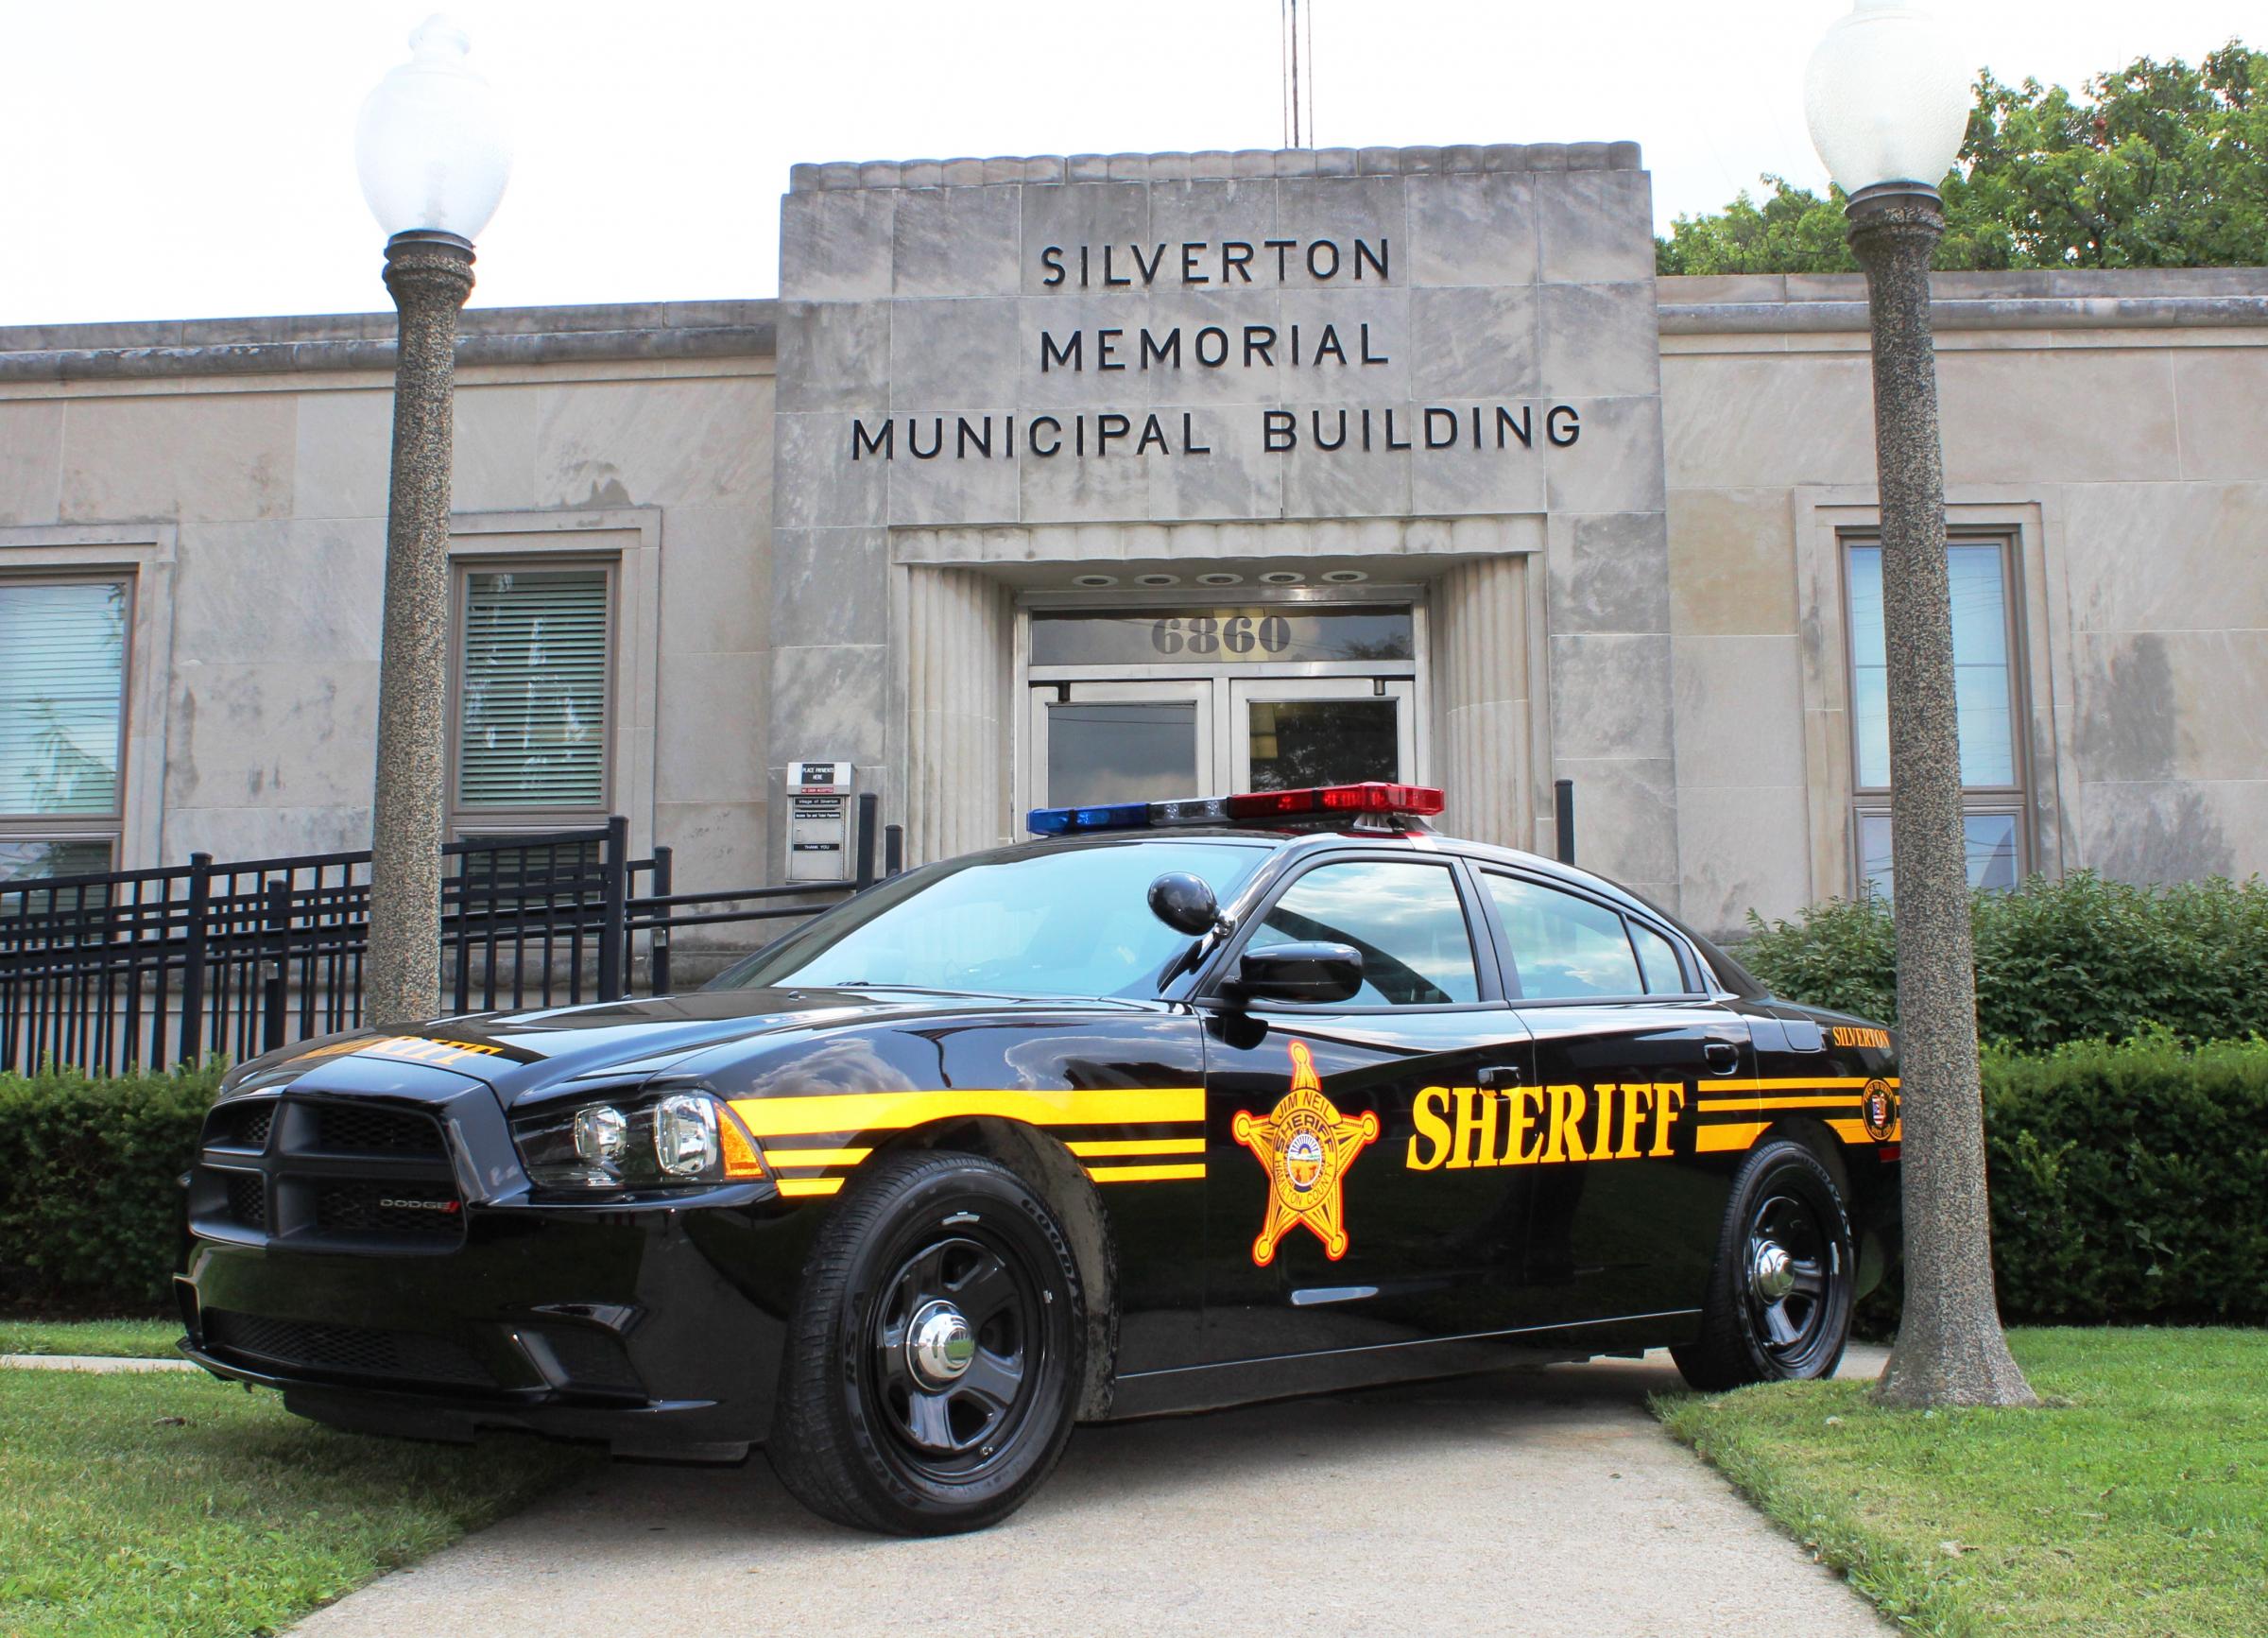 Silverton contracting police services from Hamilton County Sheriff | WVXU